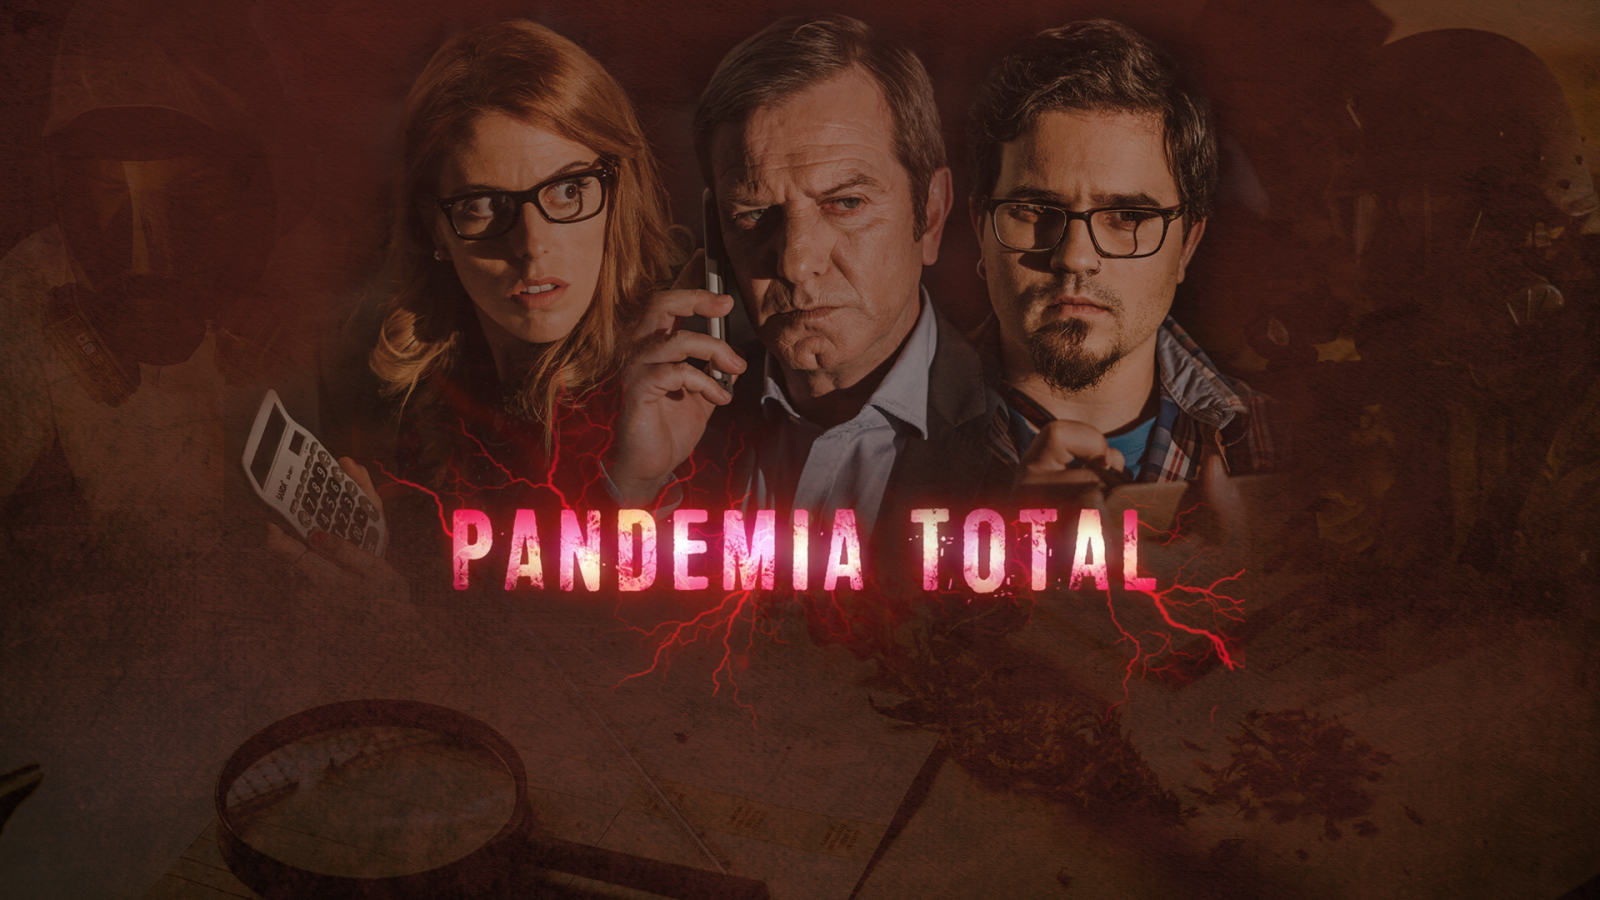 Neverfilms - Pandemia total